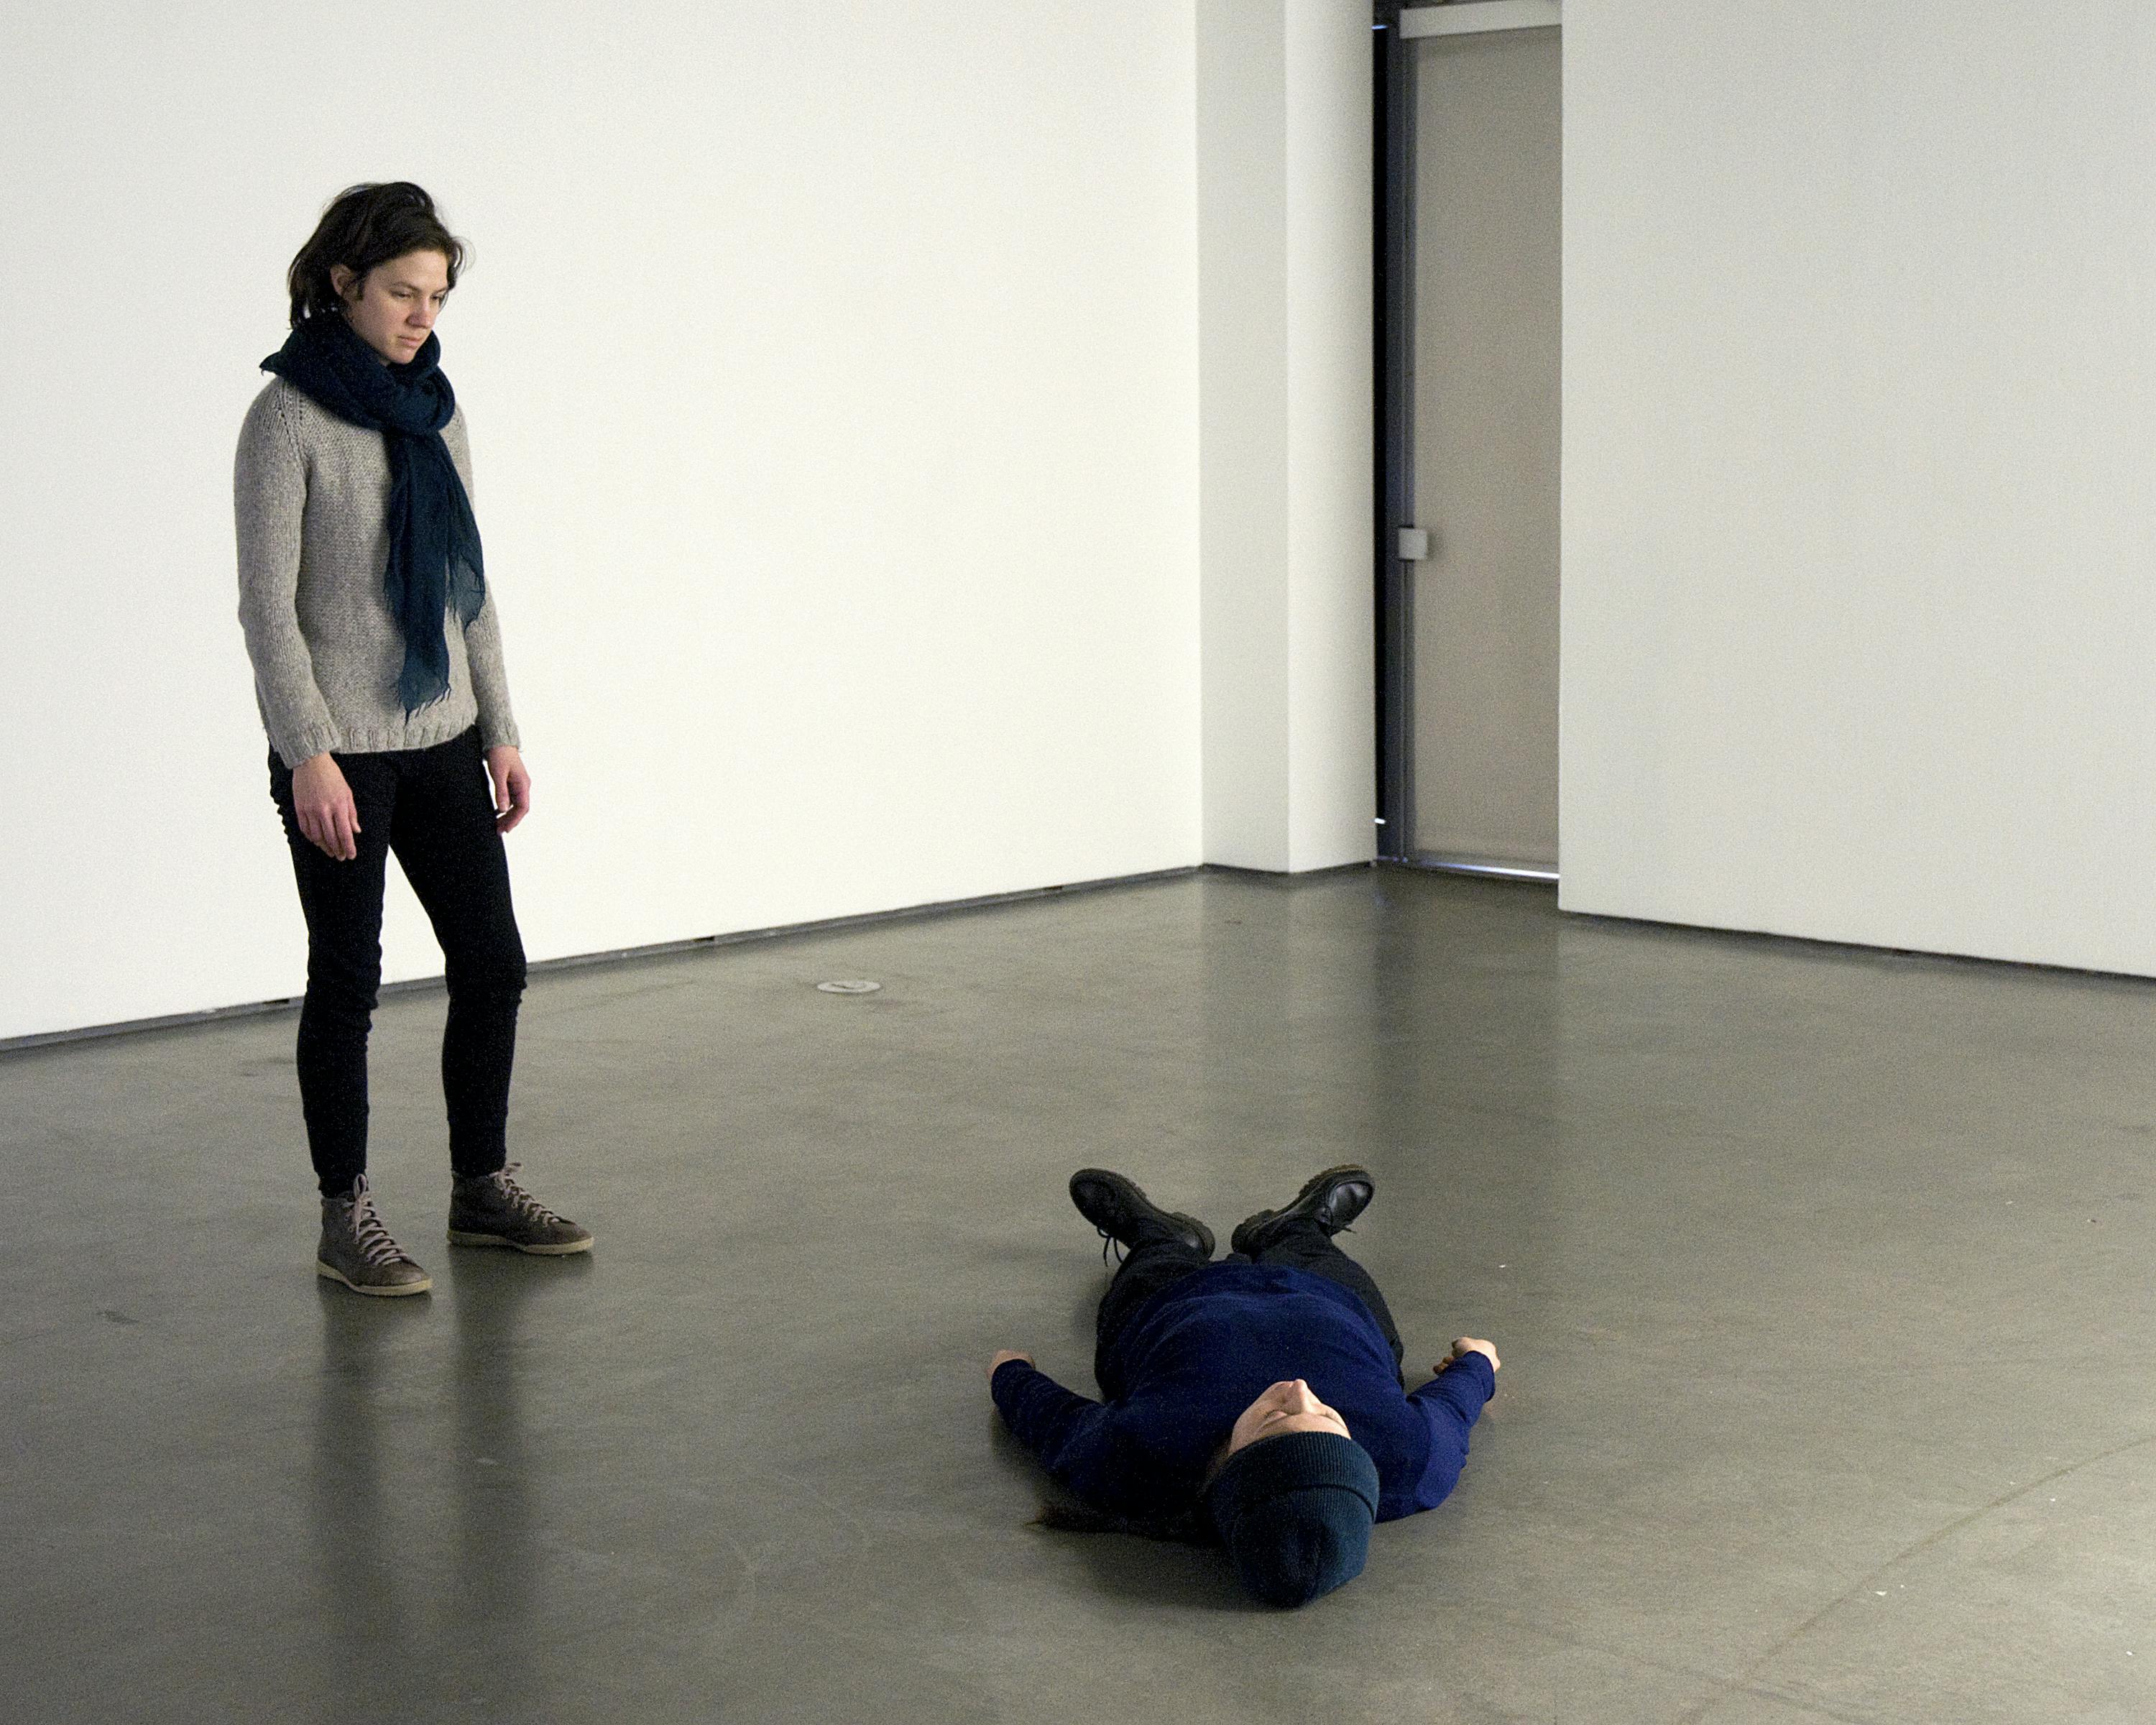 Two people are performing in a gallery space. The one wearing a blue-green scarf is standing straight and looking down at the other, who is lying down on the floor.